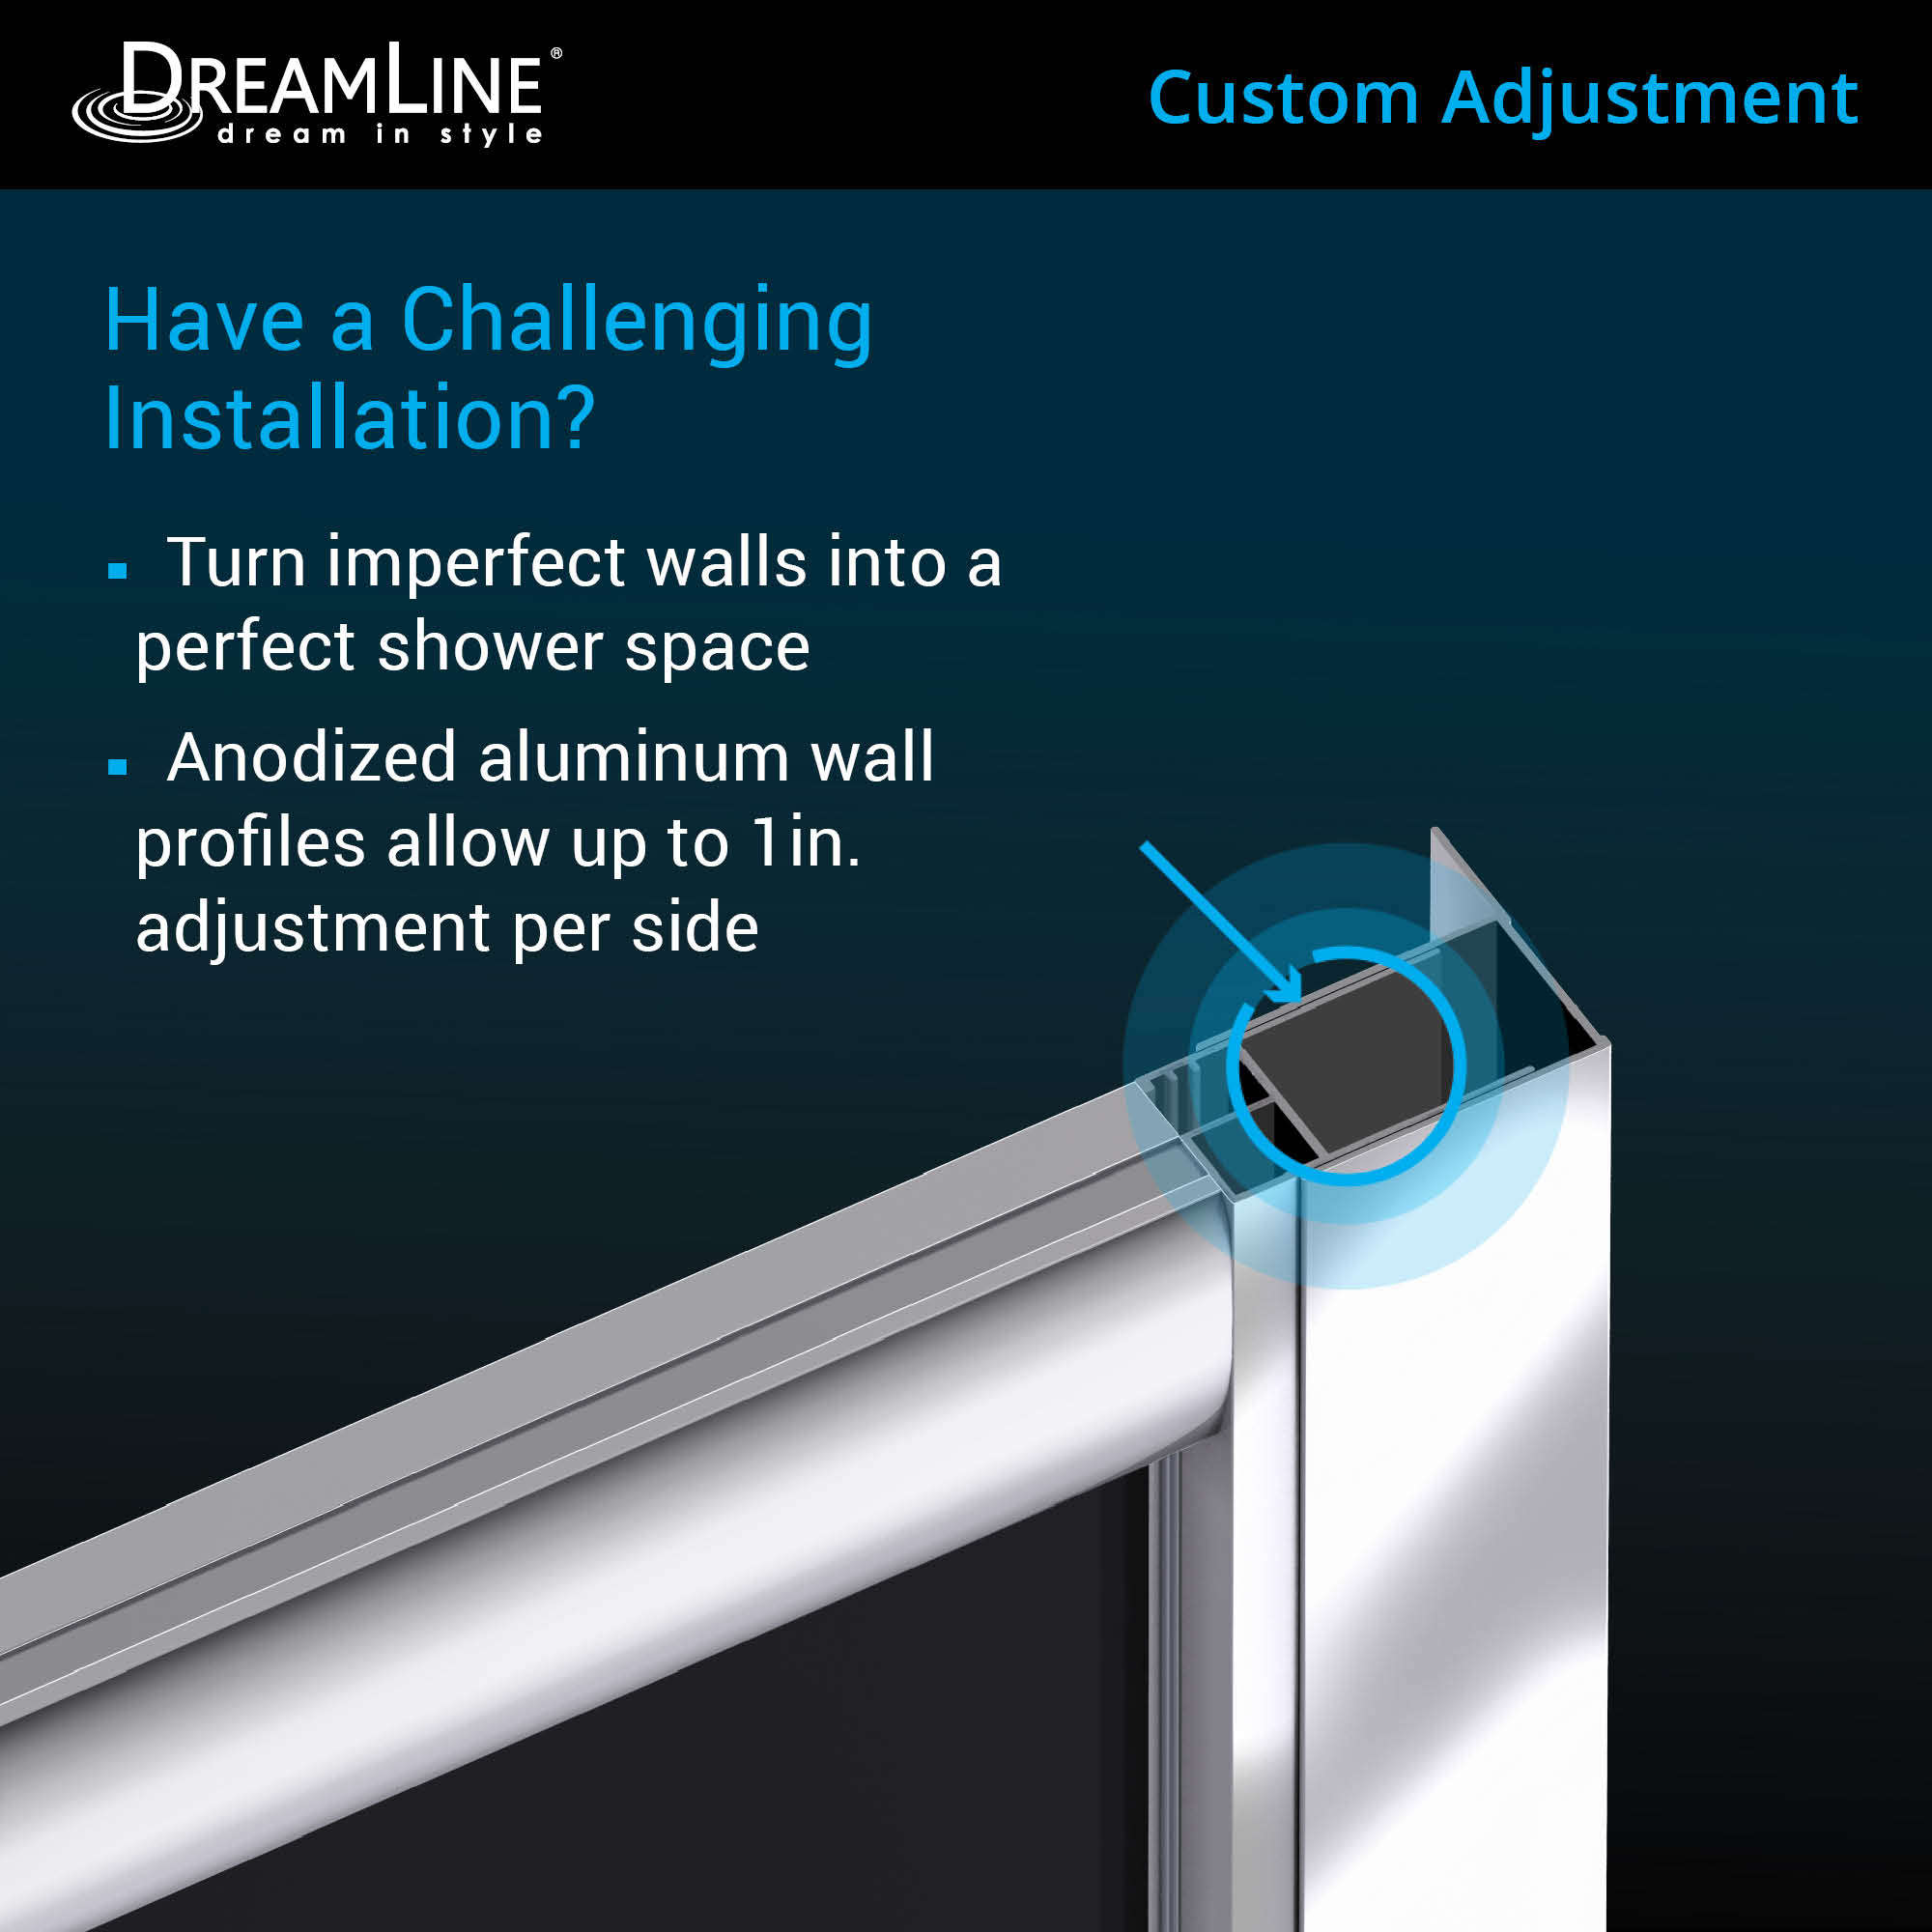 DreamLine Prime 38 in. x 74 3/4 in. Semi-Frameless Clear Glass Sliding Shower Enclosure in Brushed Nickel with Biscuit Base Kit